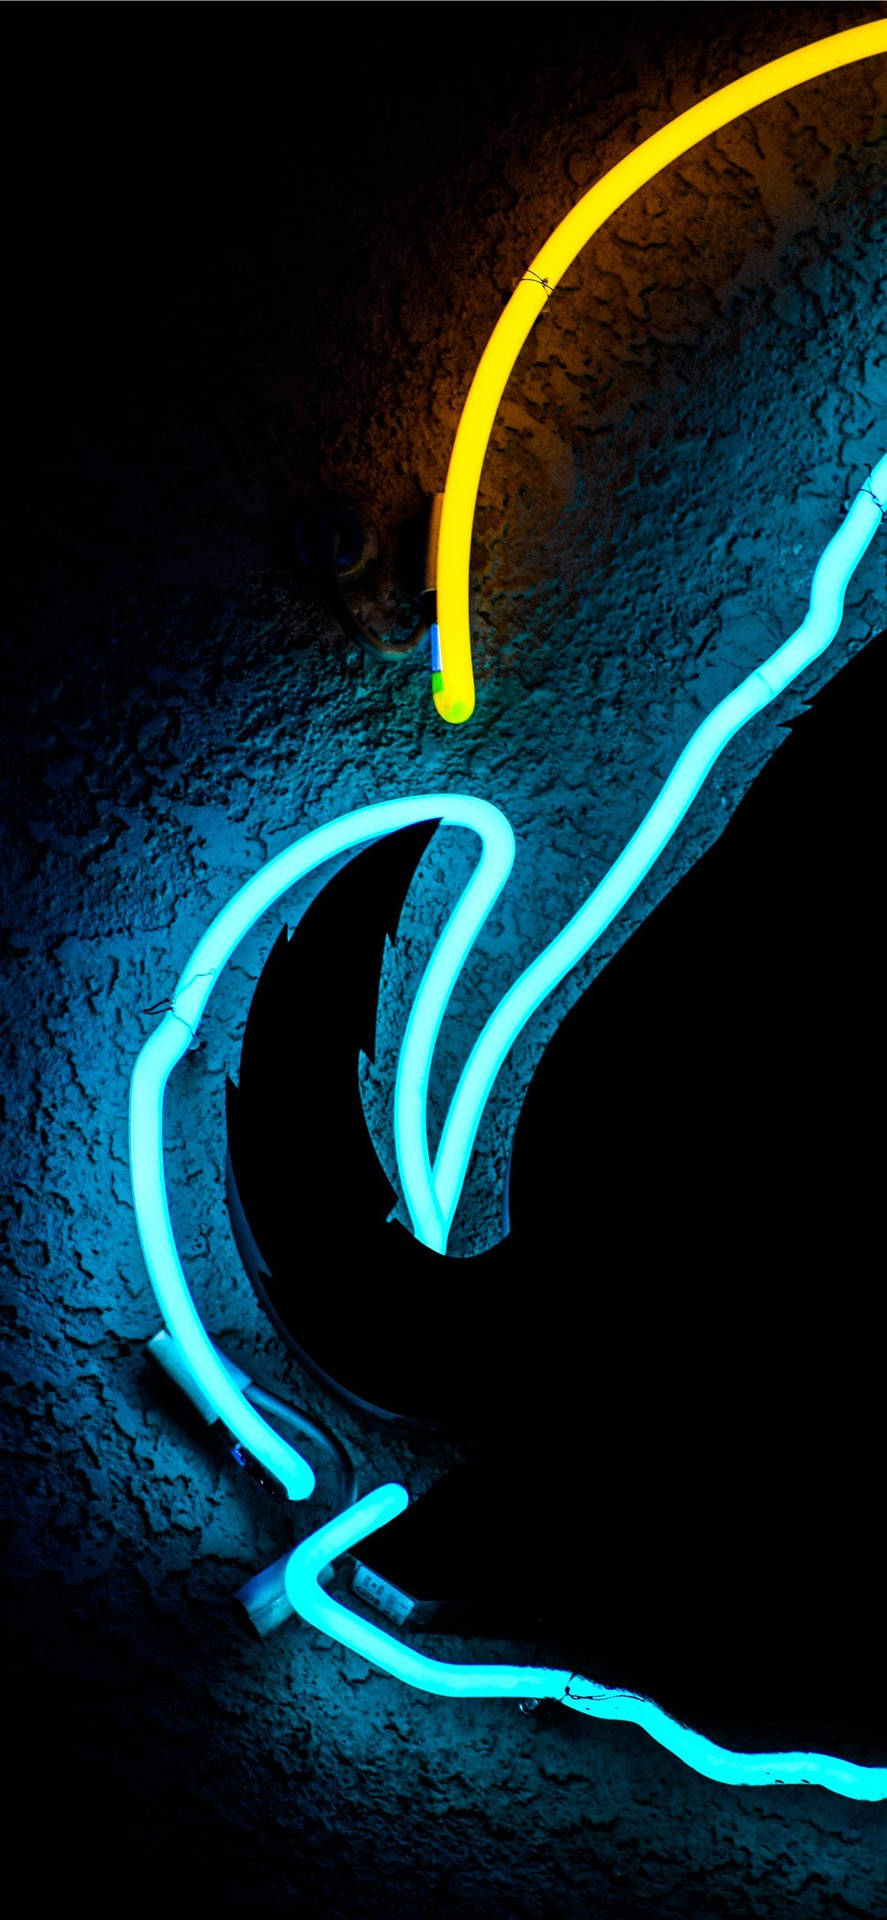 Neon Lights Iphone 11 Pro Max Background